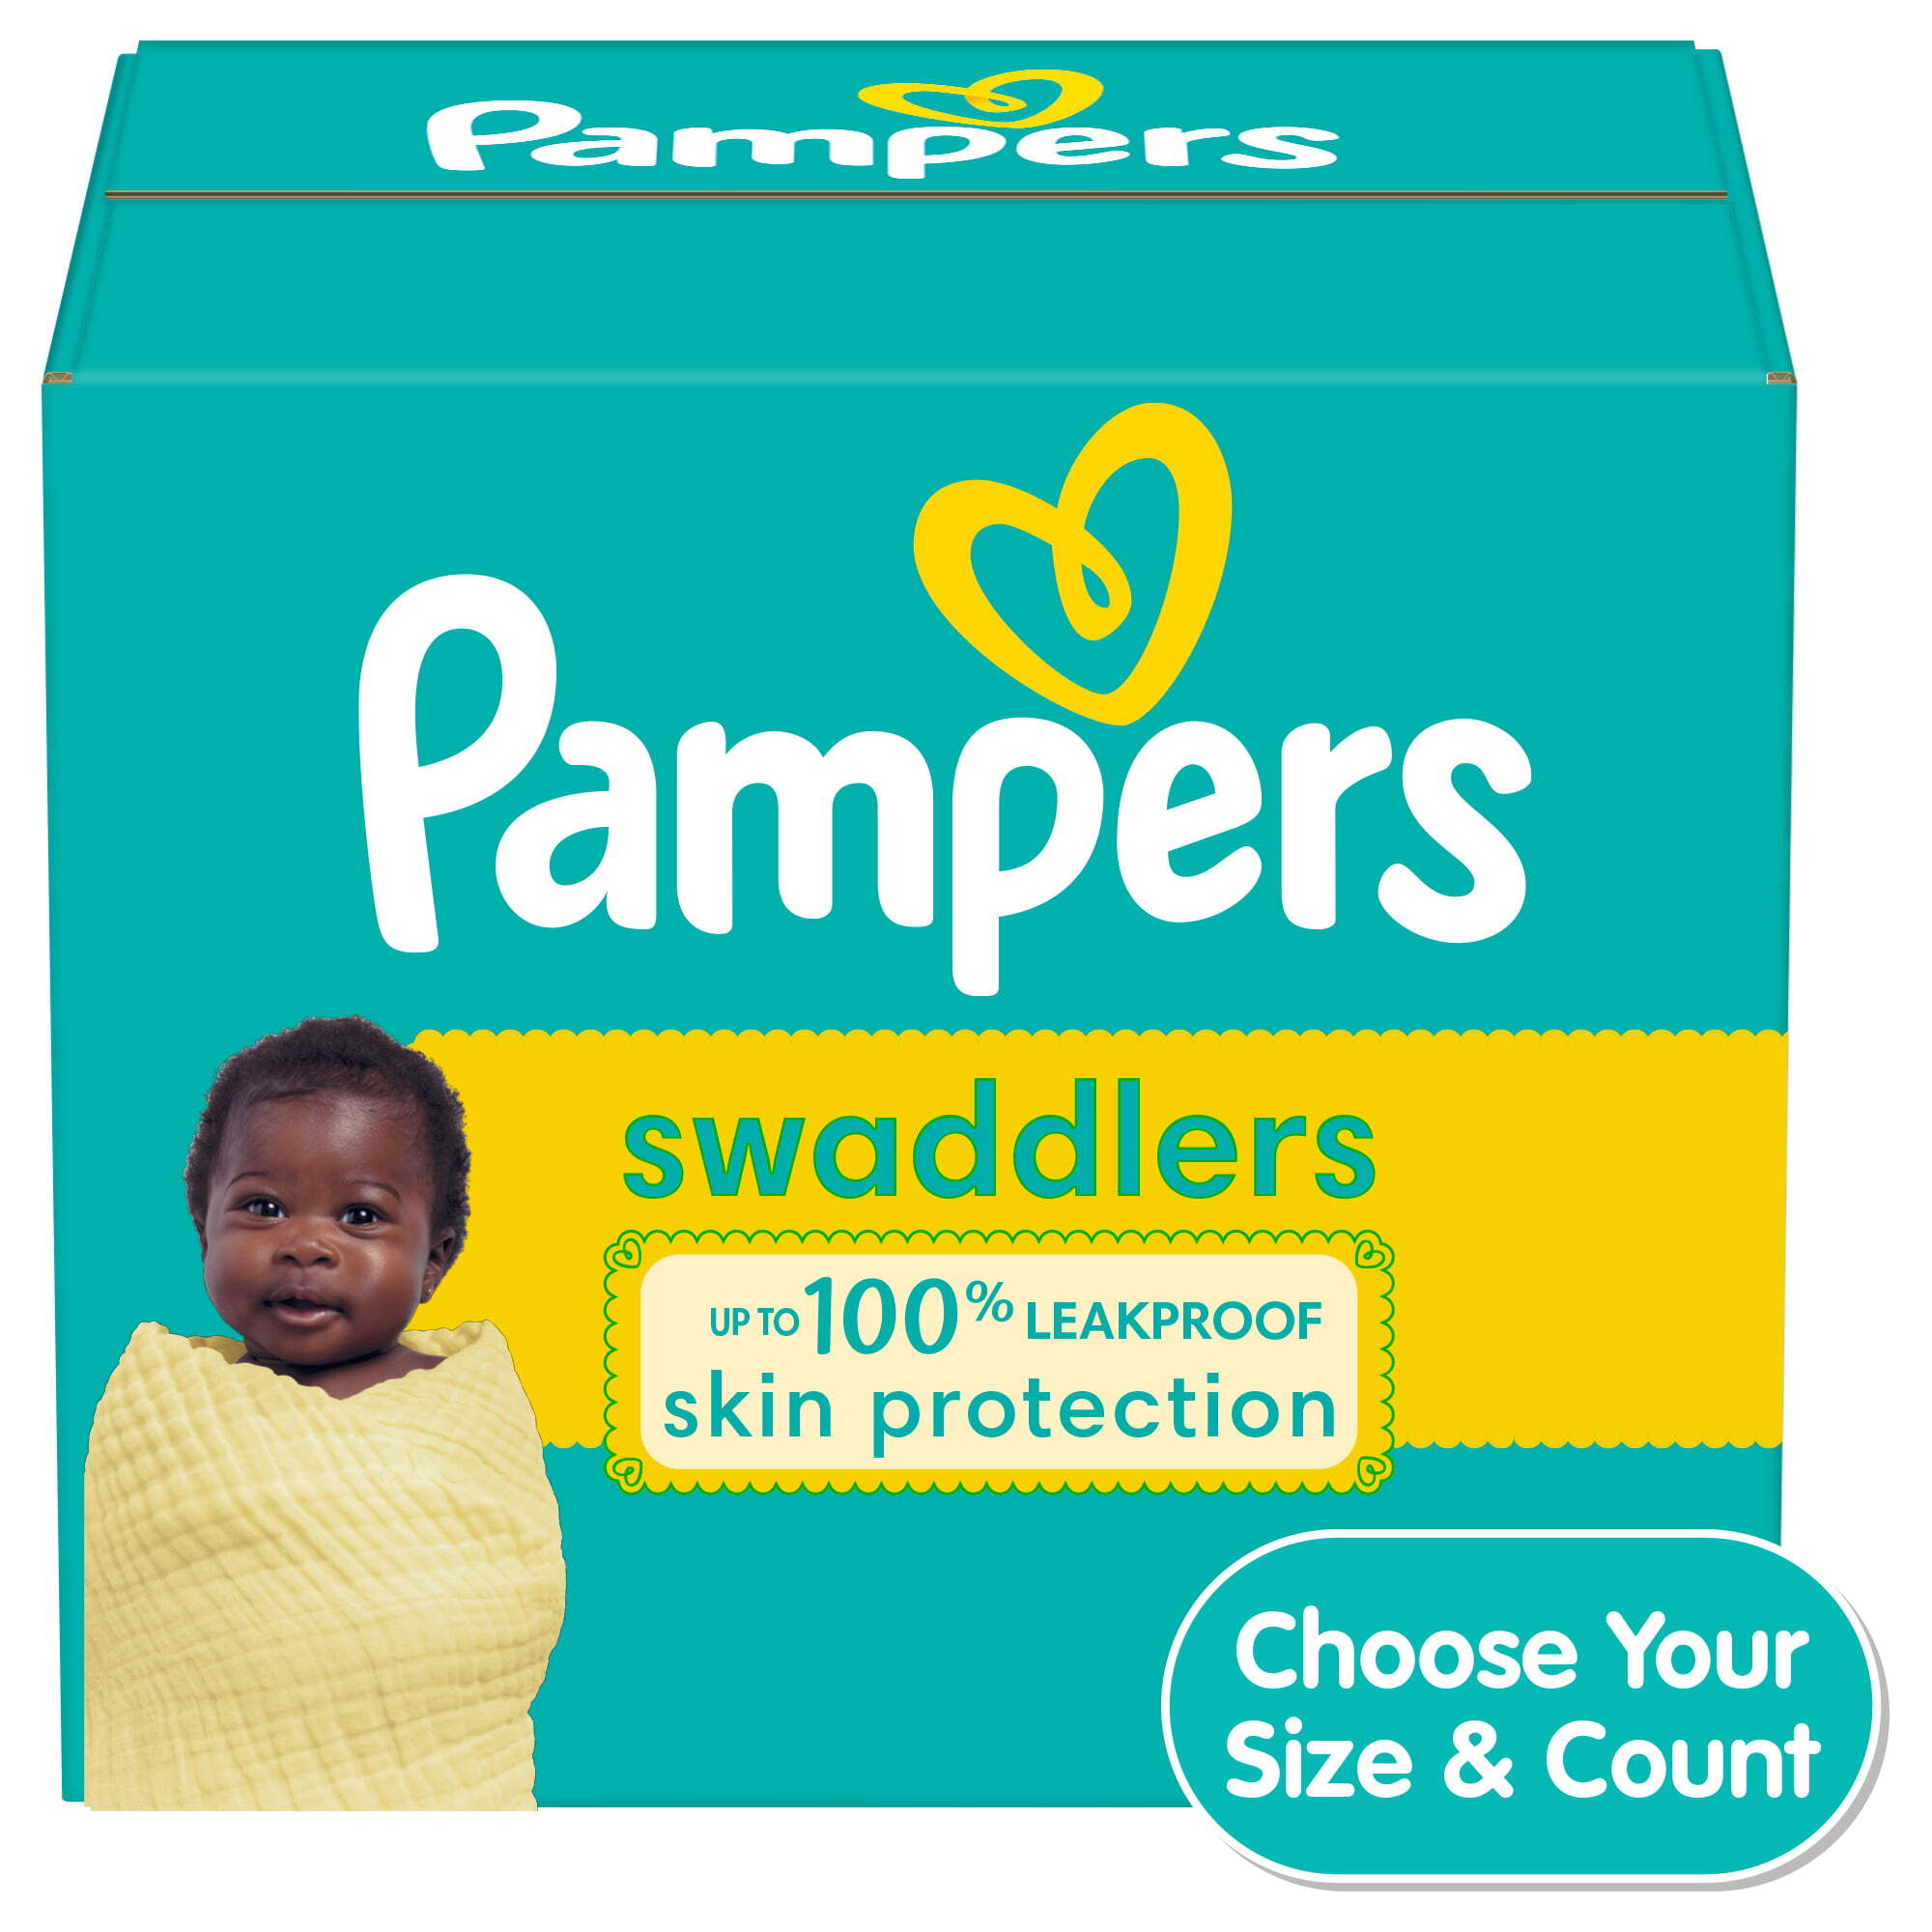 Pampers Swaddlers Diapers Size 3, 136 Count (Select for More Options) - image 1 of 13